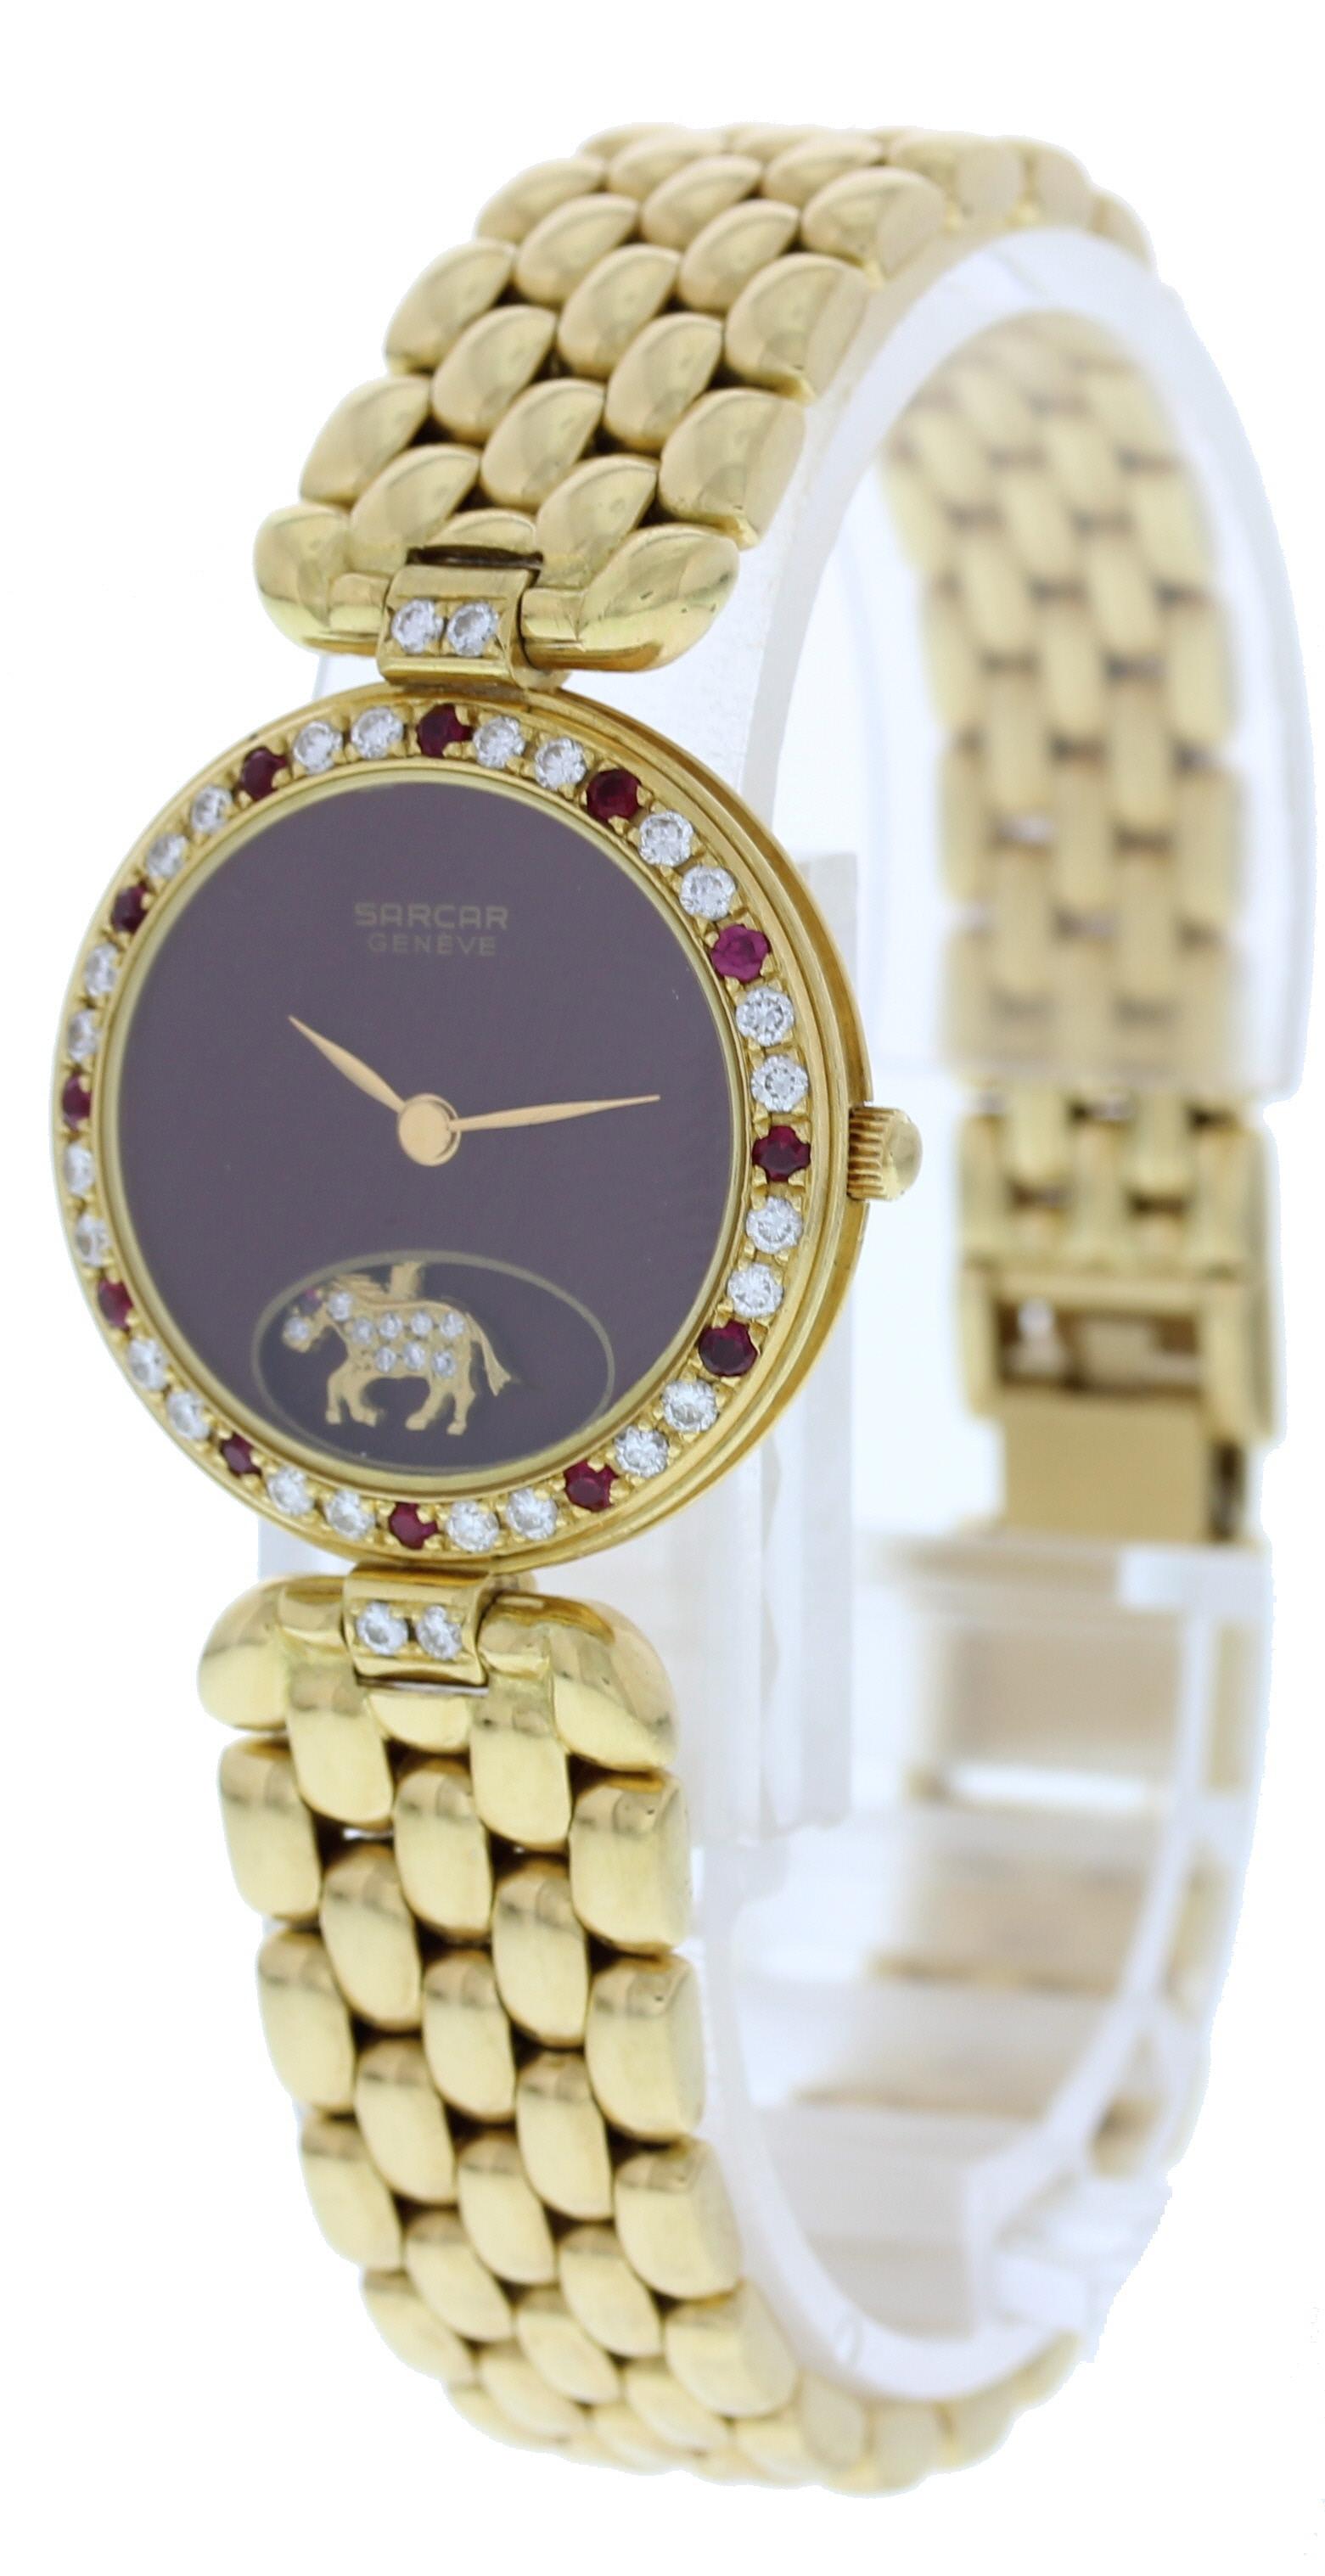 Sarcar Geneve 18k Yellow Gold Ladies Watch. 18K yellow gold 25mm case. Gold bezel with factory set diamonds and rubbies. Dark red dial with gold hands. Yellow gold moving horse encrusted with diamonds and a ruby. Gold bracelet will fit a 6 inch